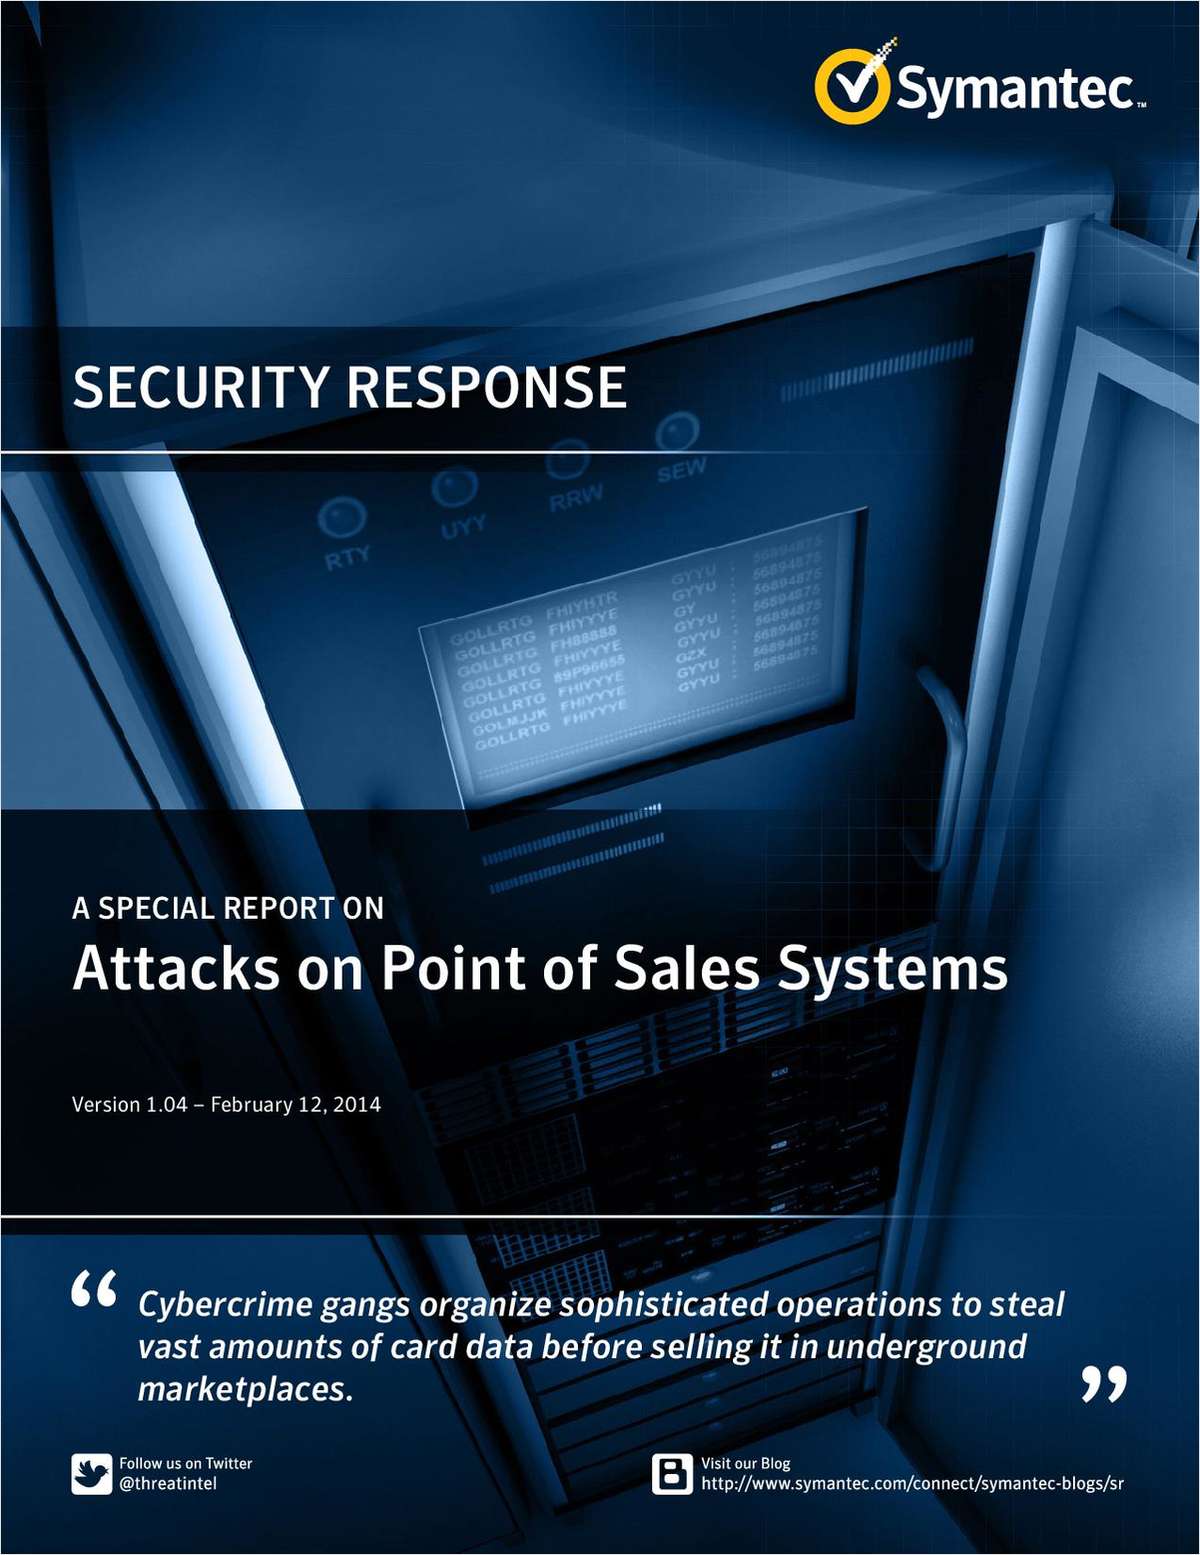 Attacks on Point of Sales Systems